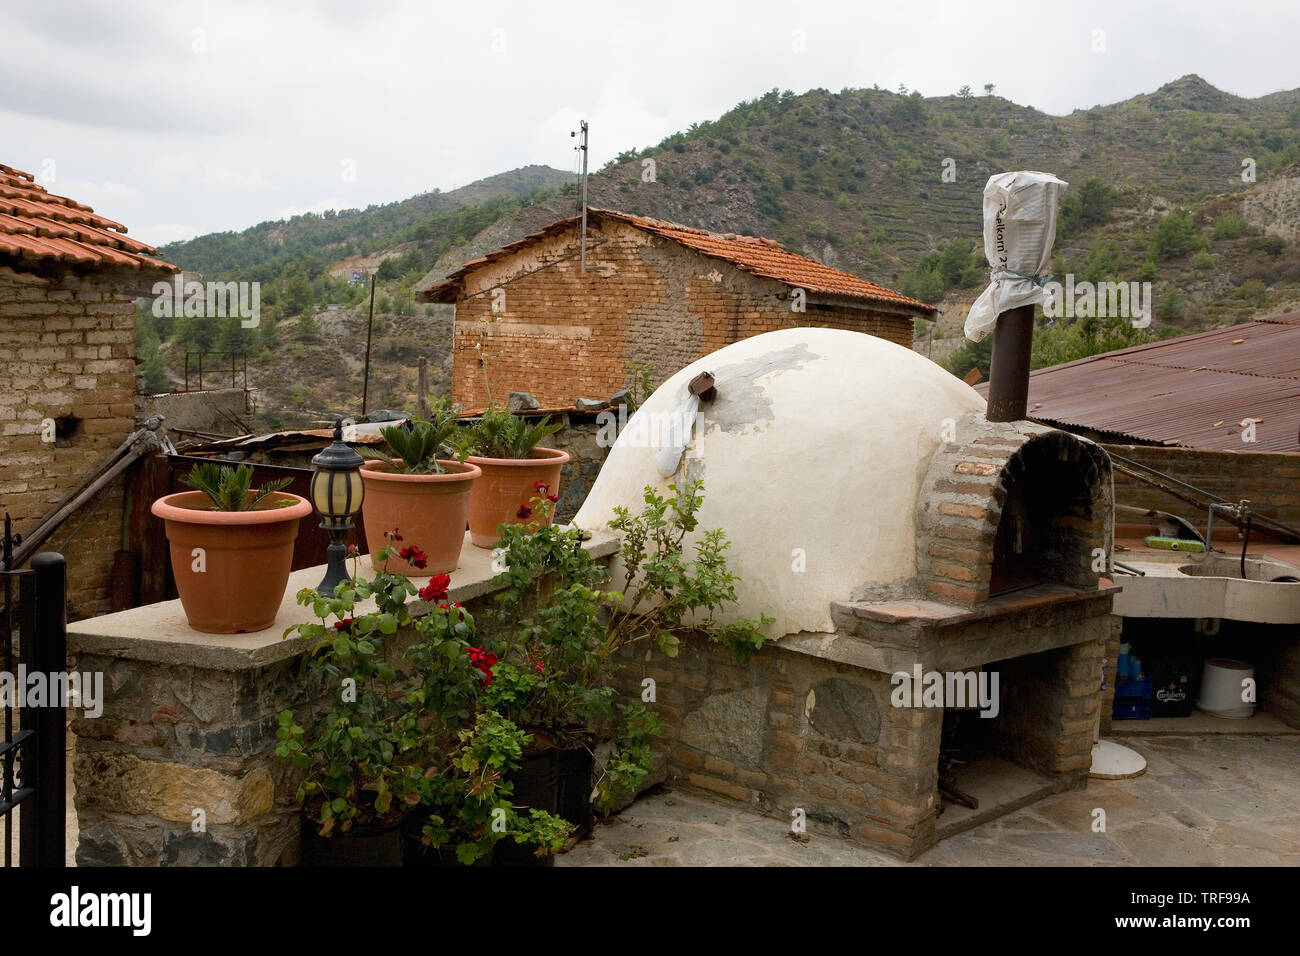 Outdoor communal bread oven in the village of Peléndhri, Limmasol District, Cyprus Stock Photo